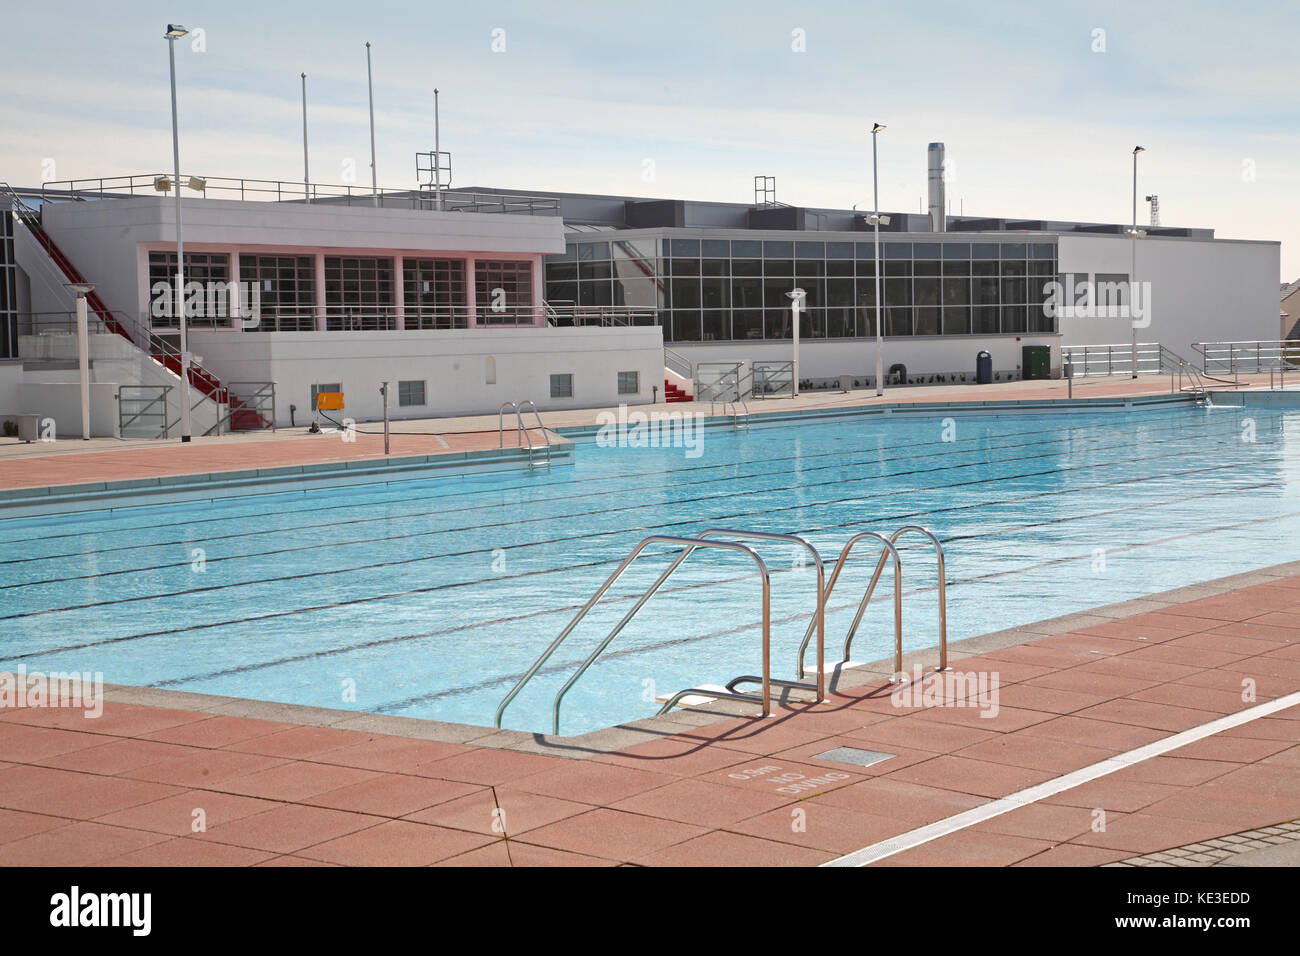 The newly refurbished outdoor swimming pool at Uxbridge Lido and sports centre west of London, UK. Early morning view before opening to the public. Stock Photo